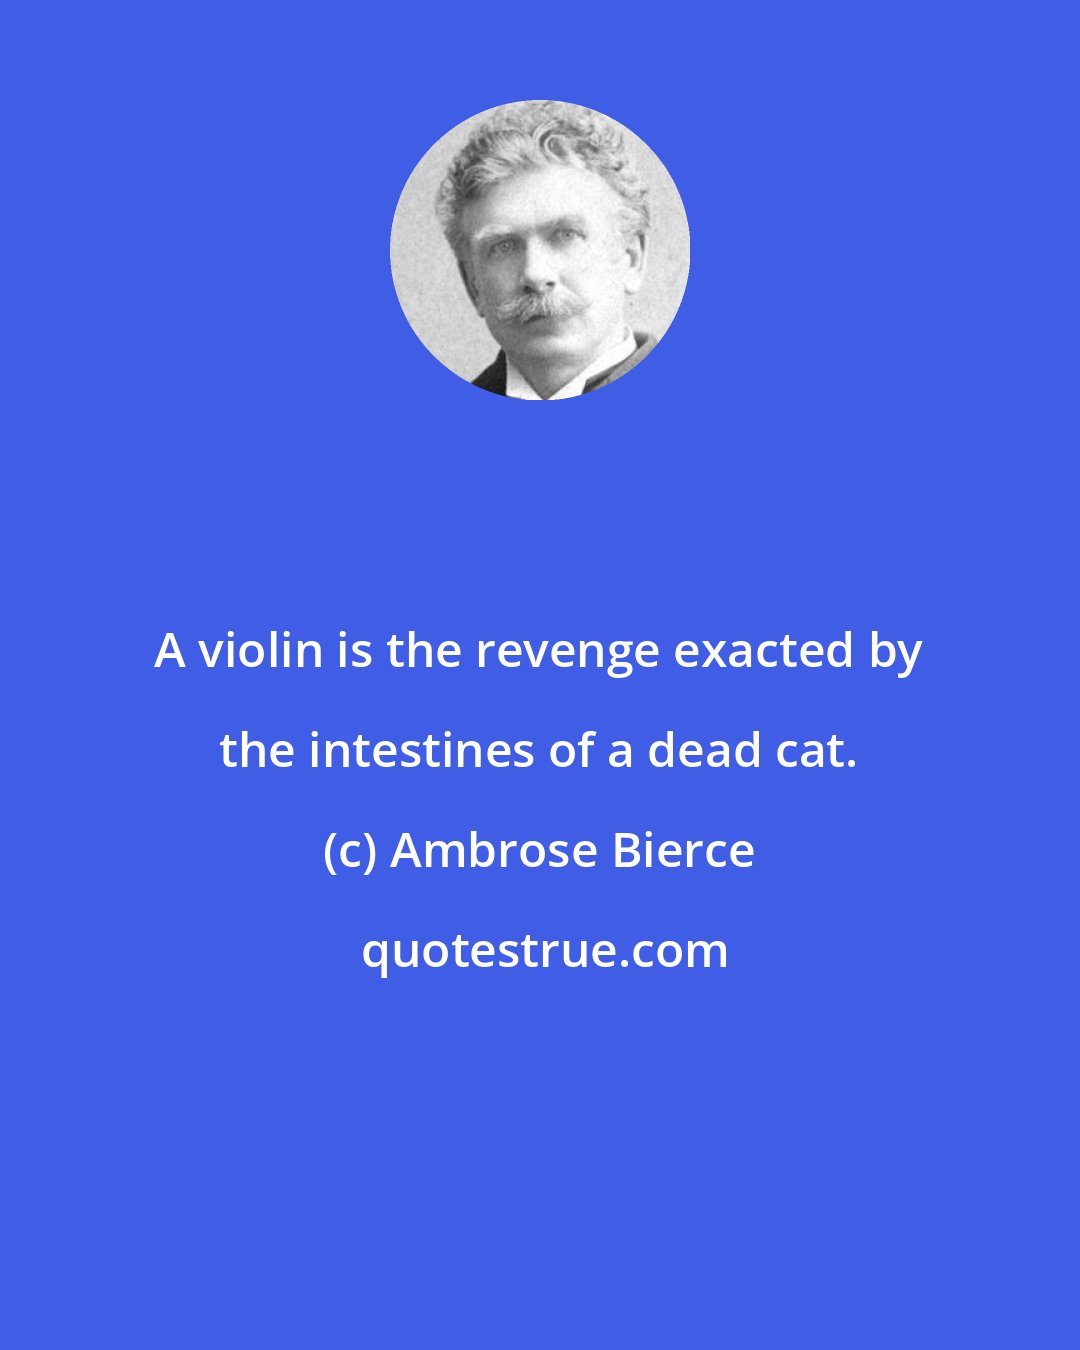 Ambrose Bierce: A violin is the revenge exacted by the intestines of a dead cat.